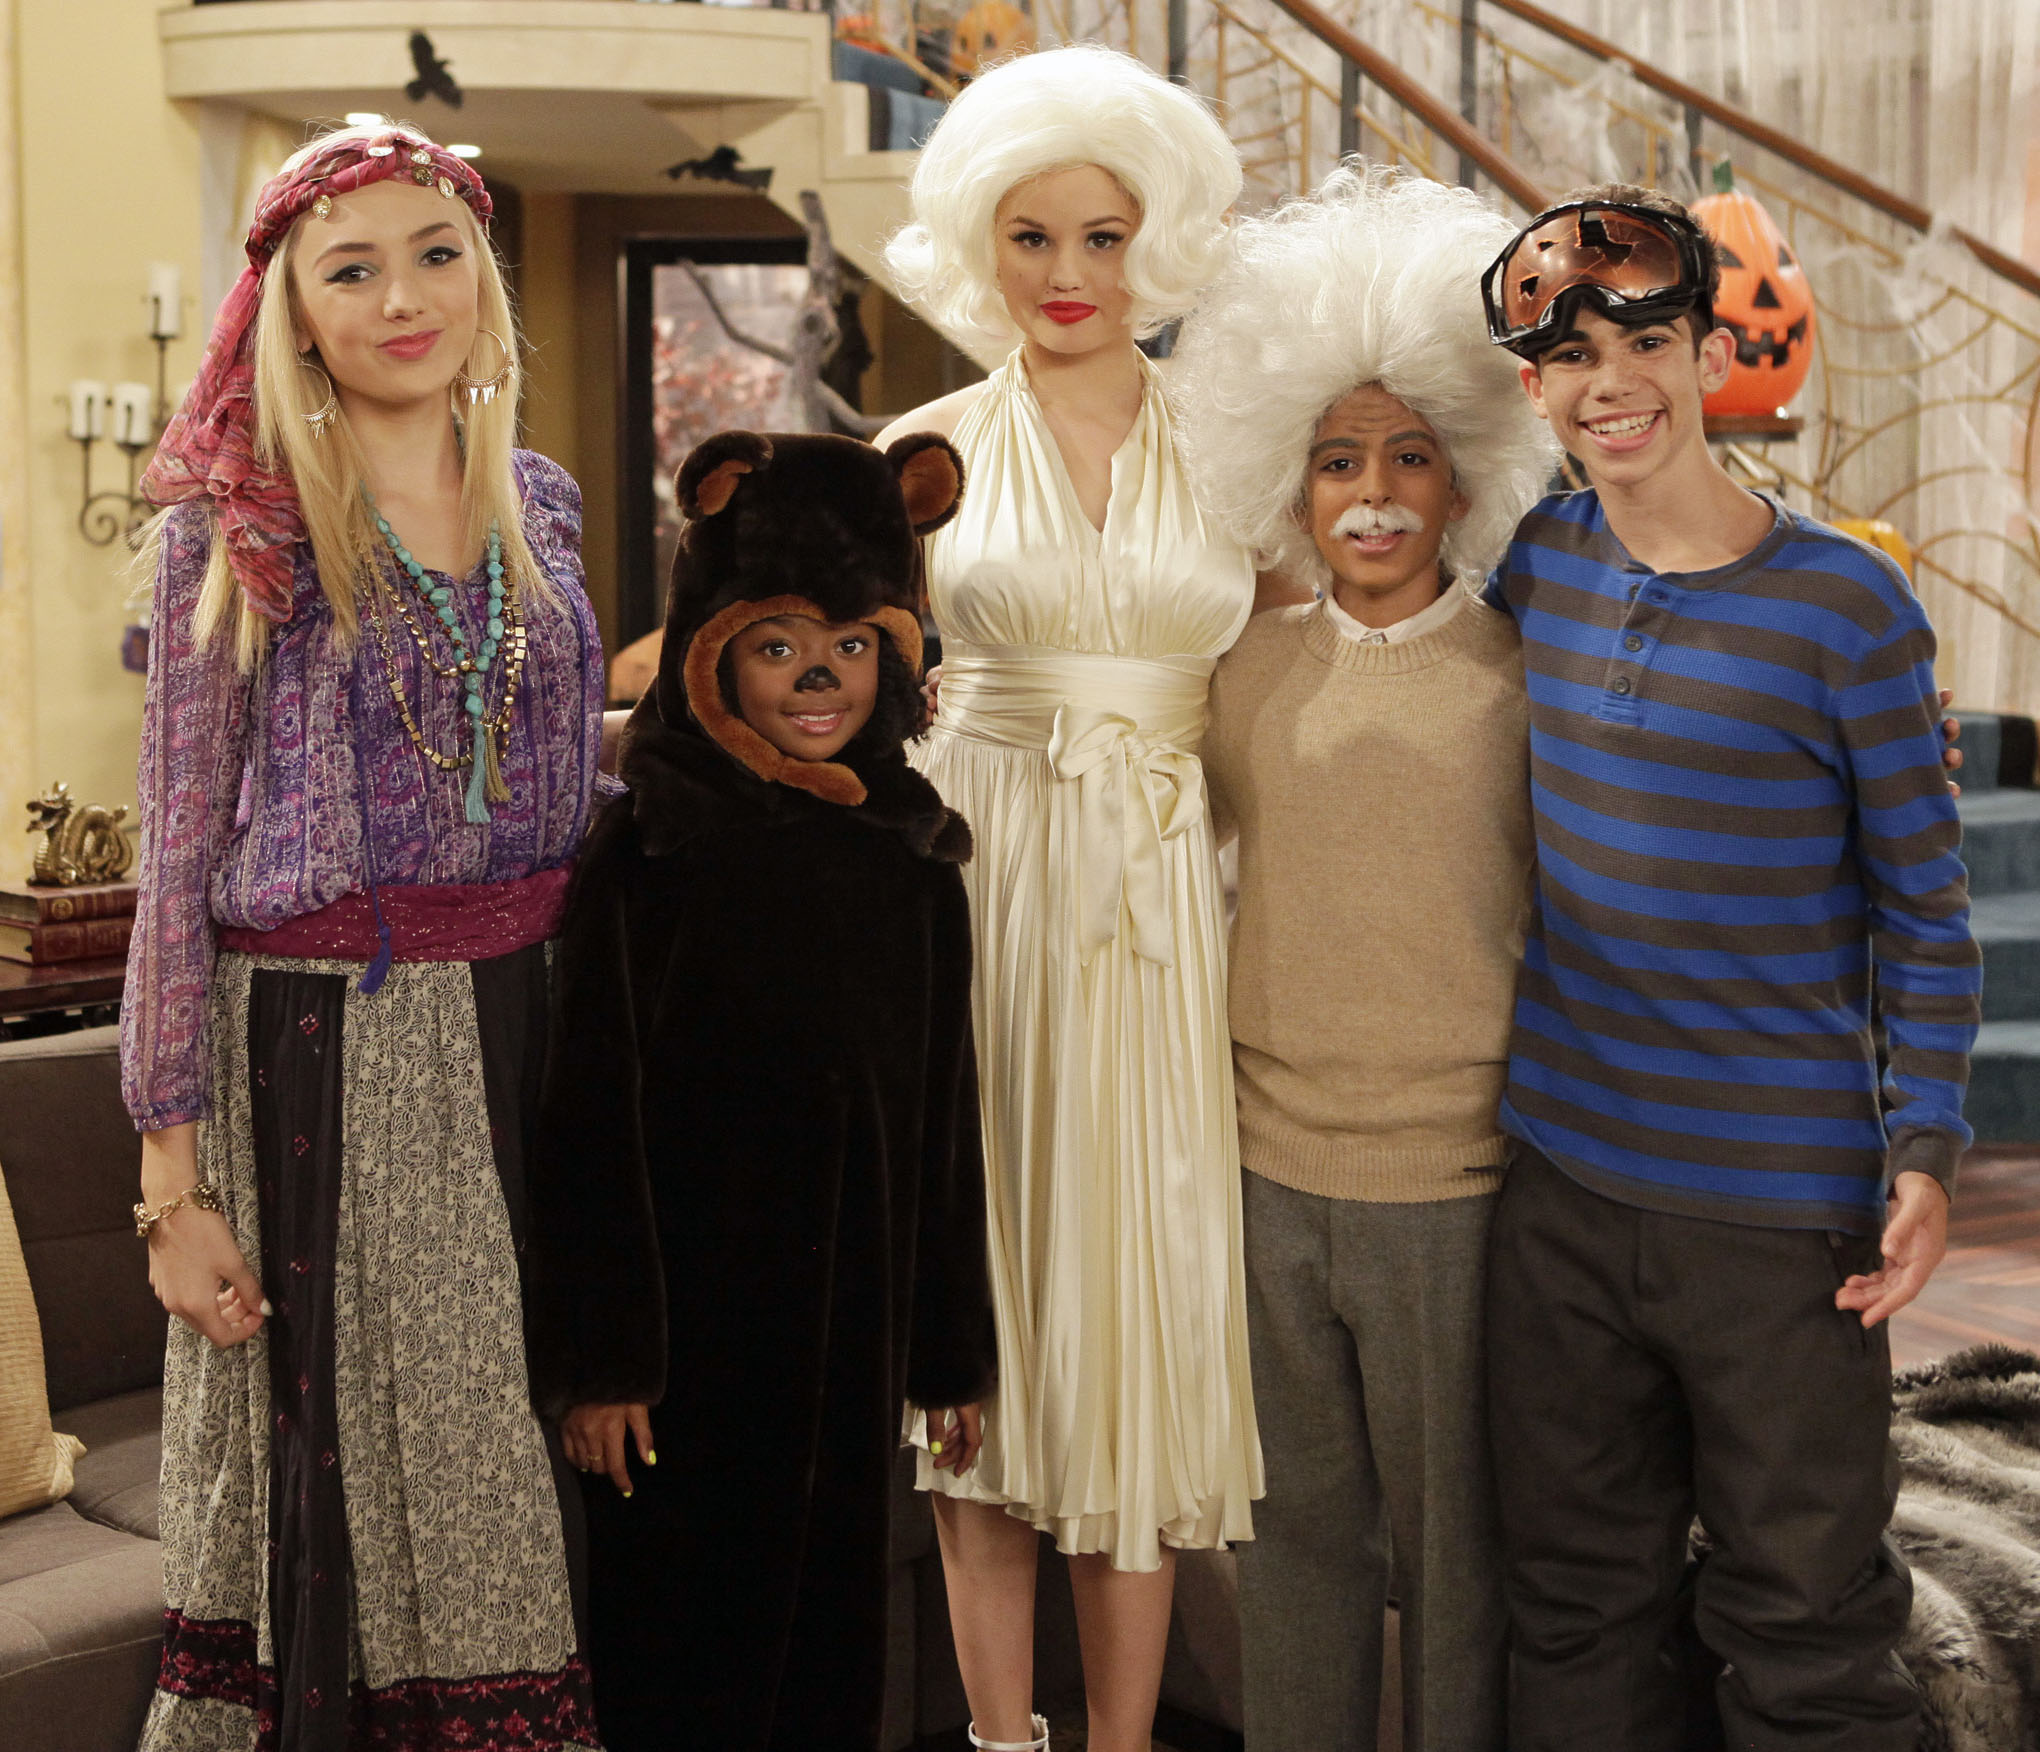 20 Pics of Our Fave TV Characters in Halloween Costumes - J-14